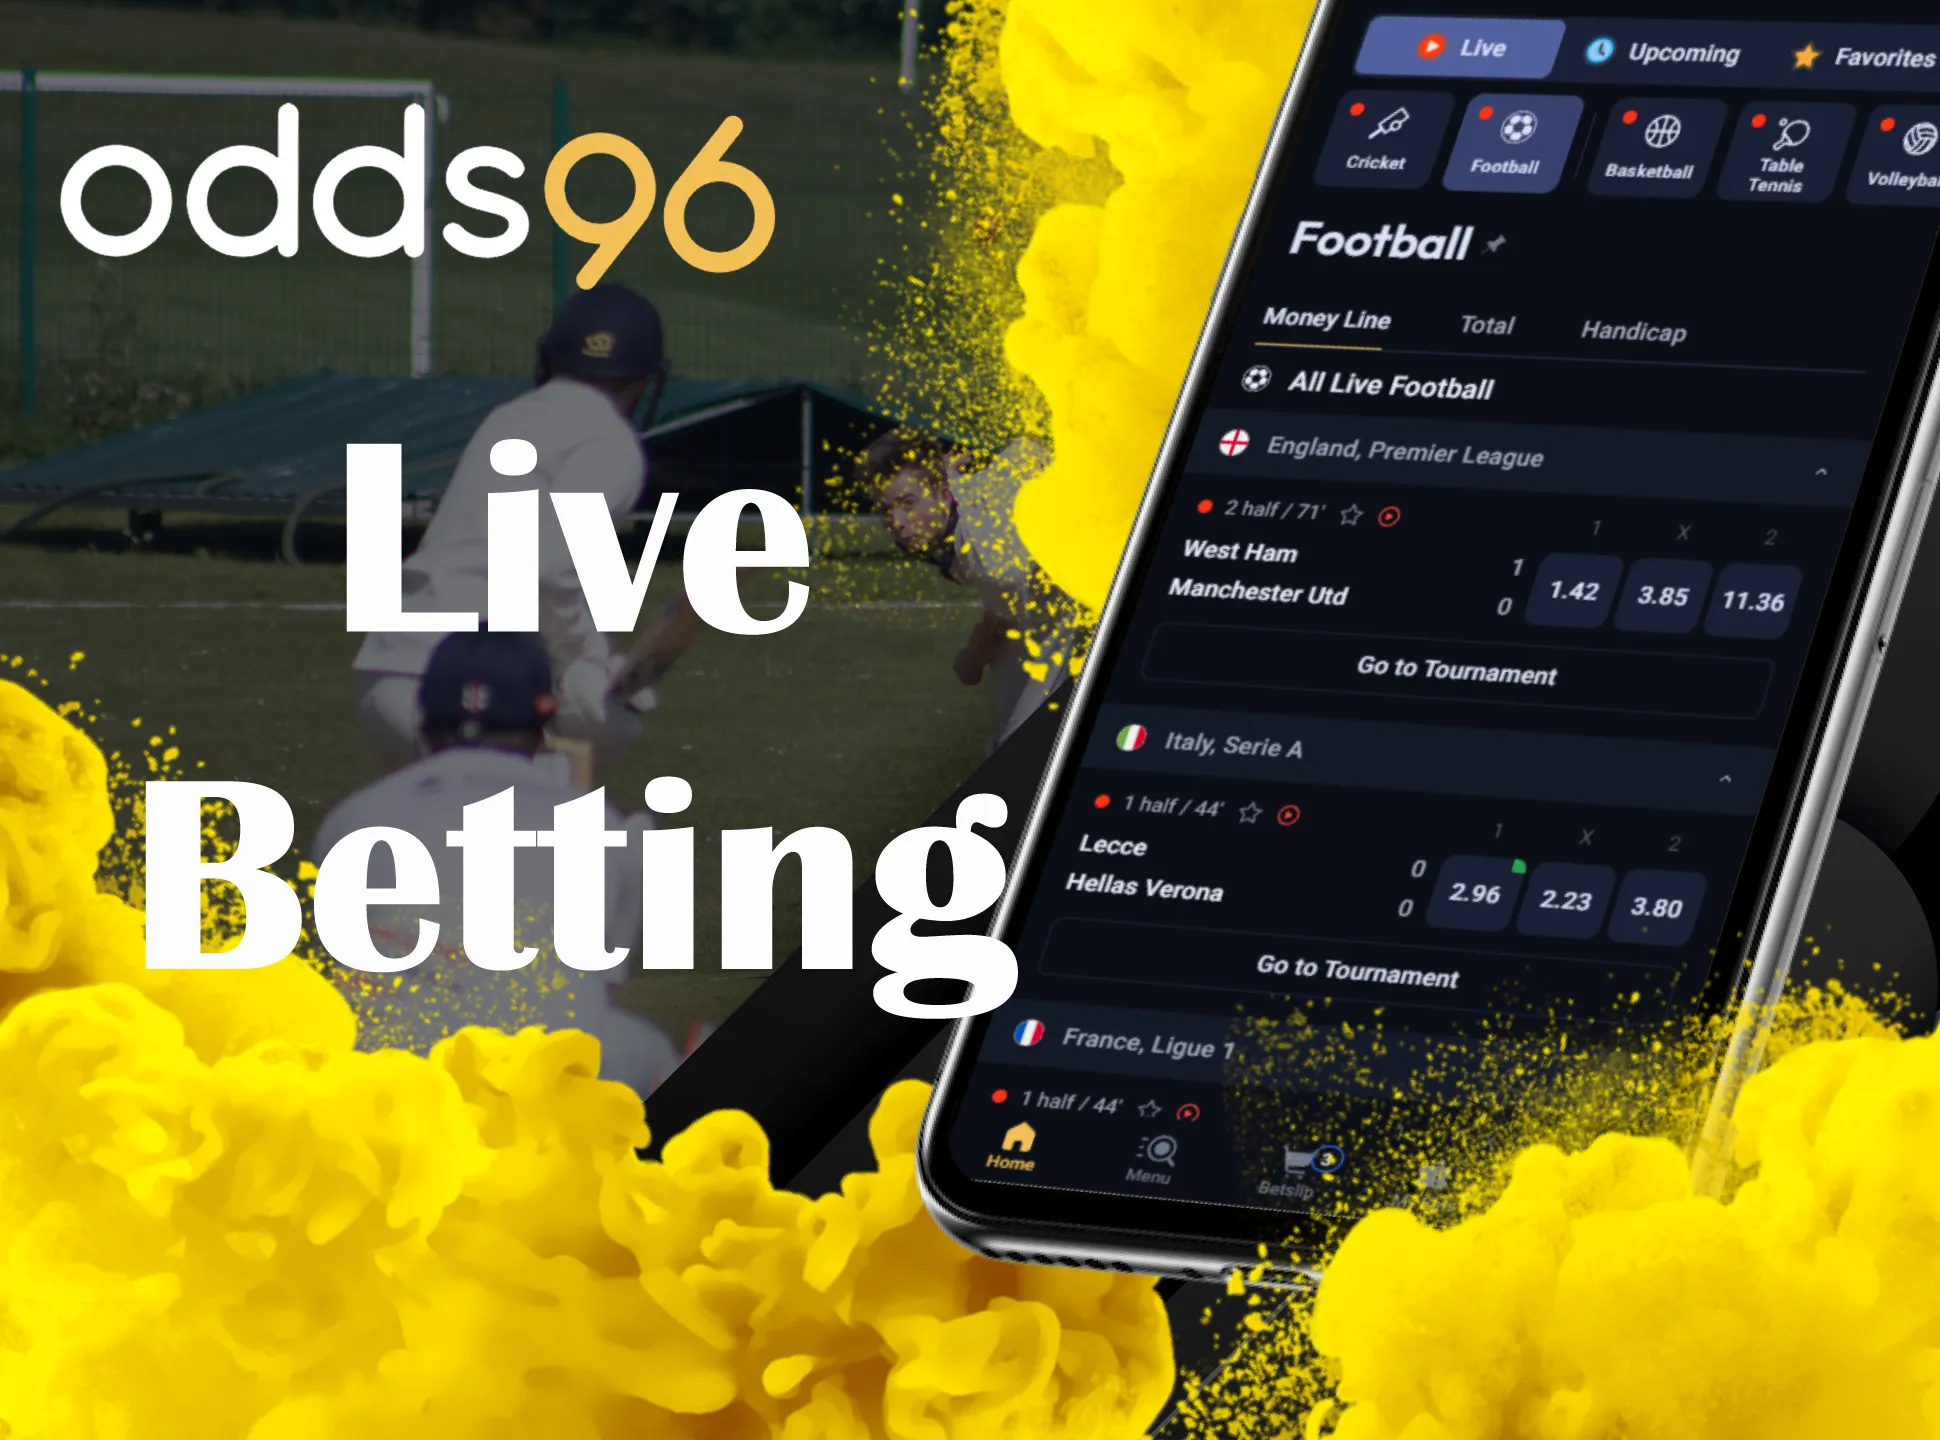 Bet in live format on special Odds96 page.